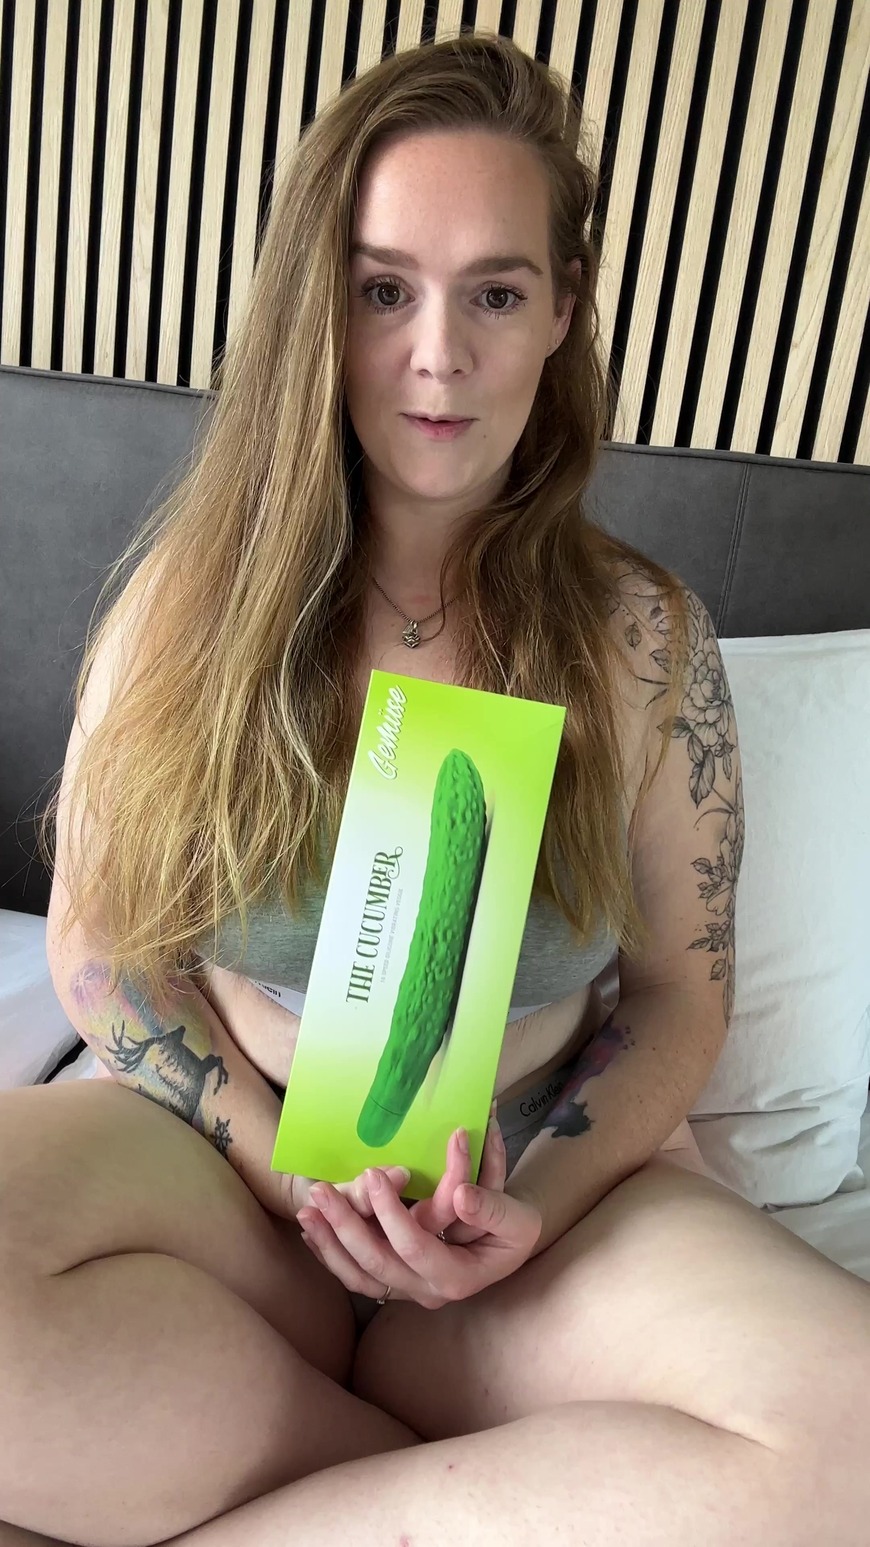 Squirting on this vibrating cucumber!🥒 - clip coverforeground